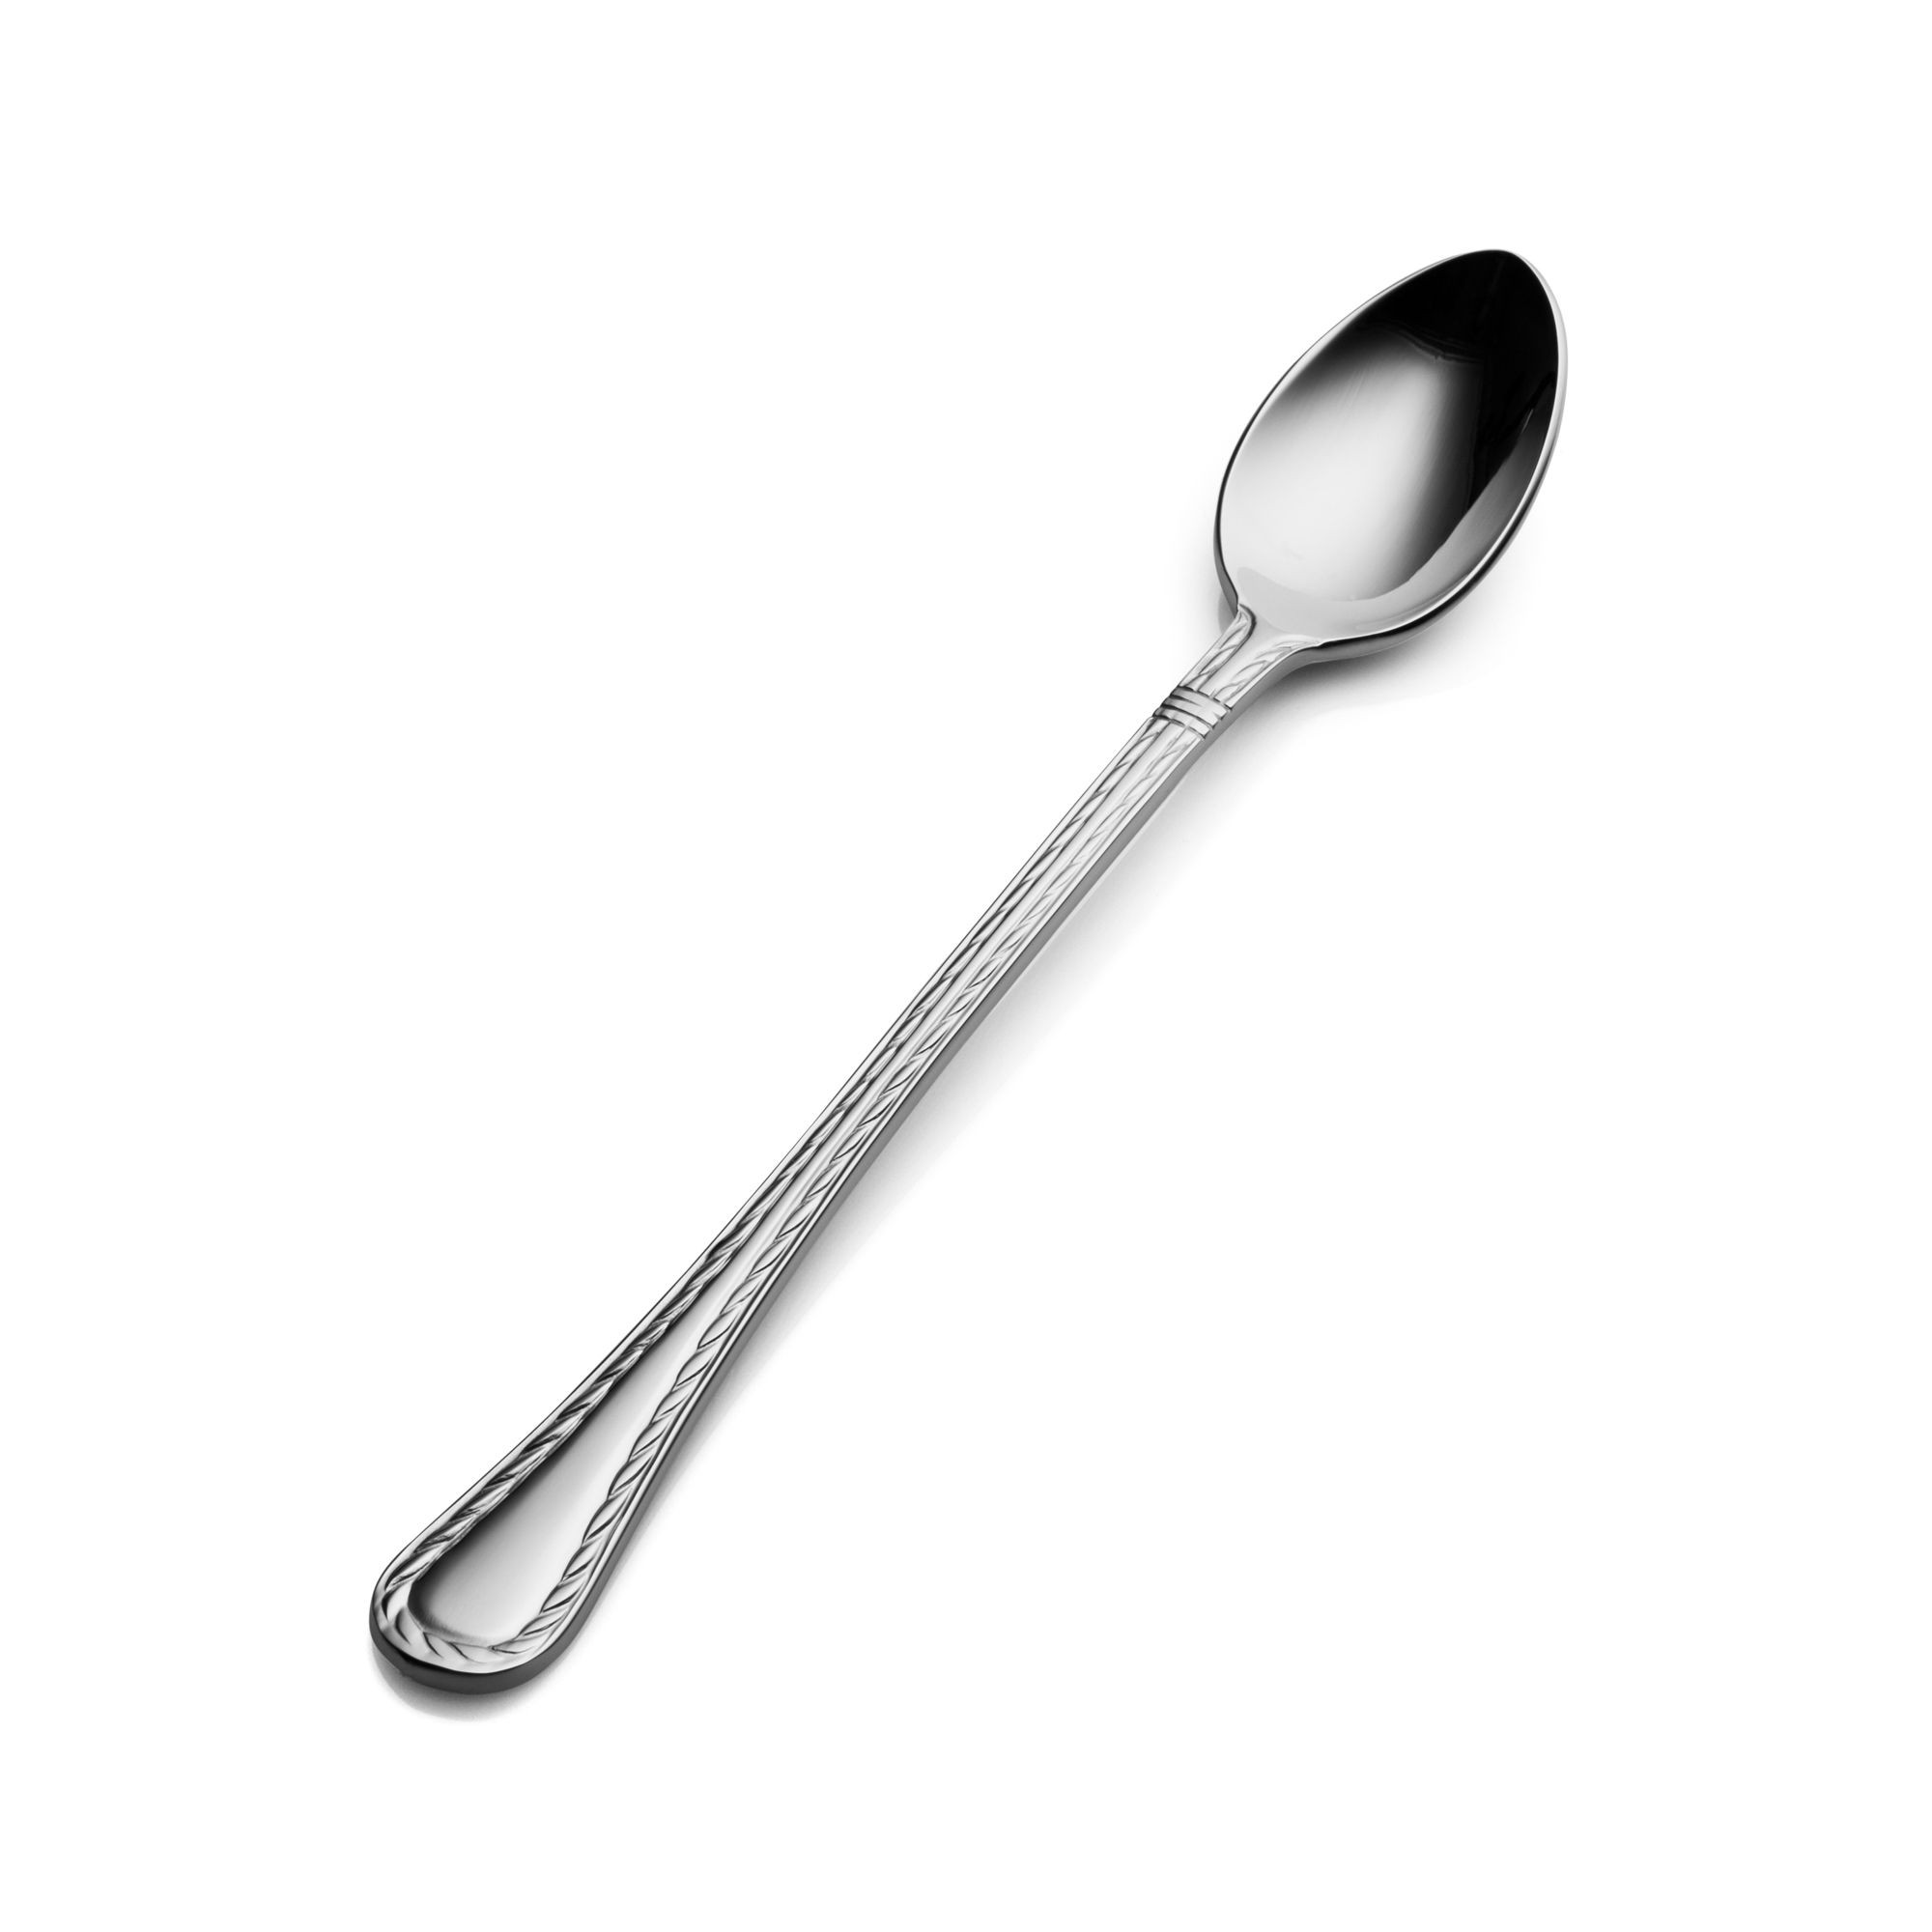 Bon Chef S402 Amore 18/8 Stainless Steel Iced Tea Spoon